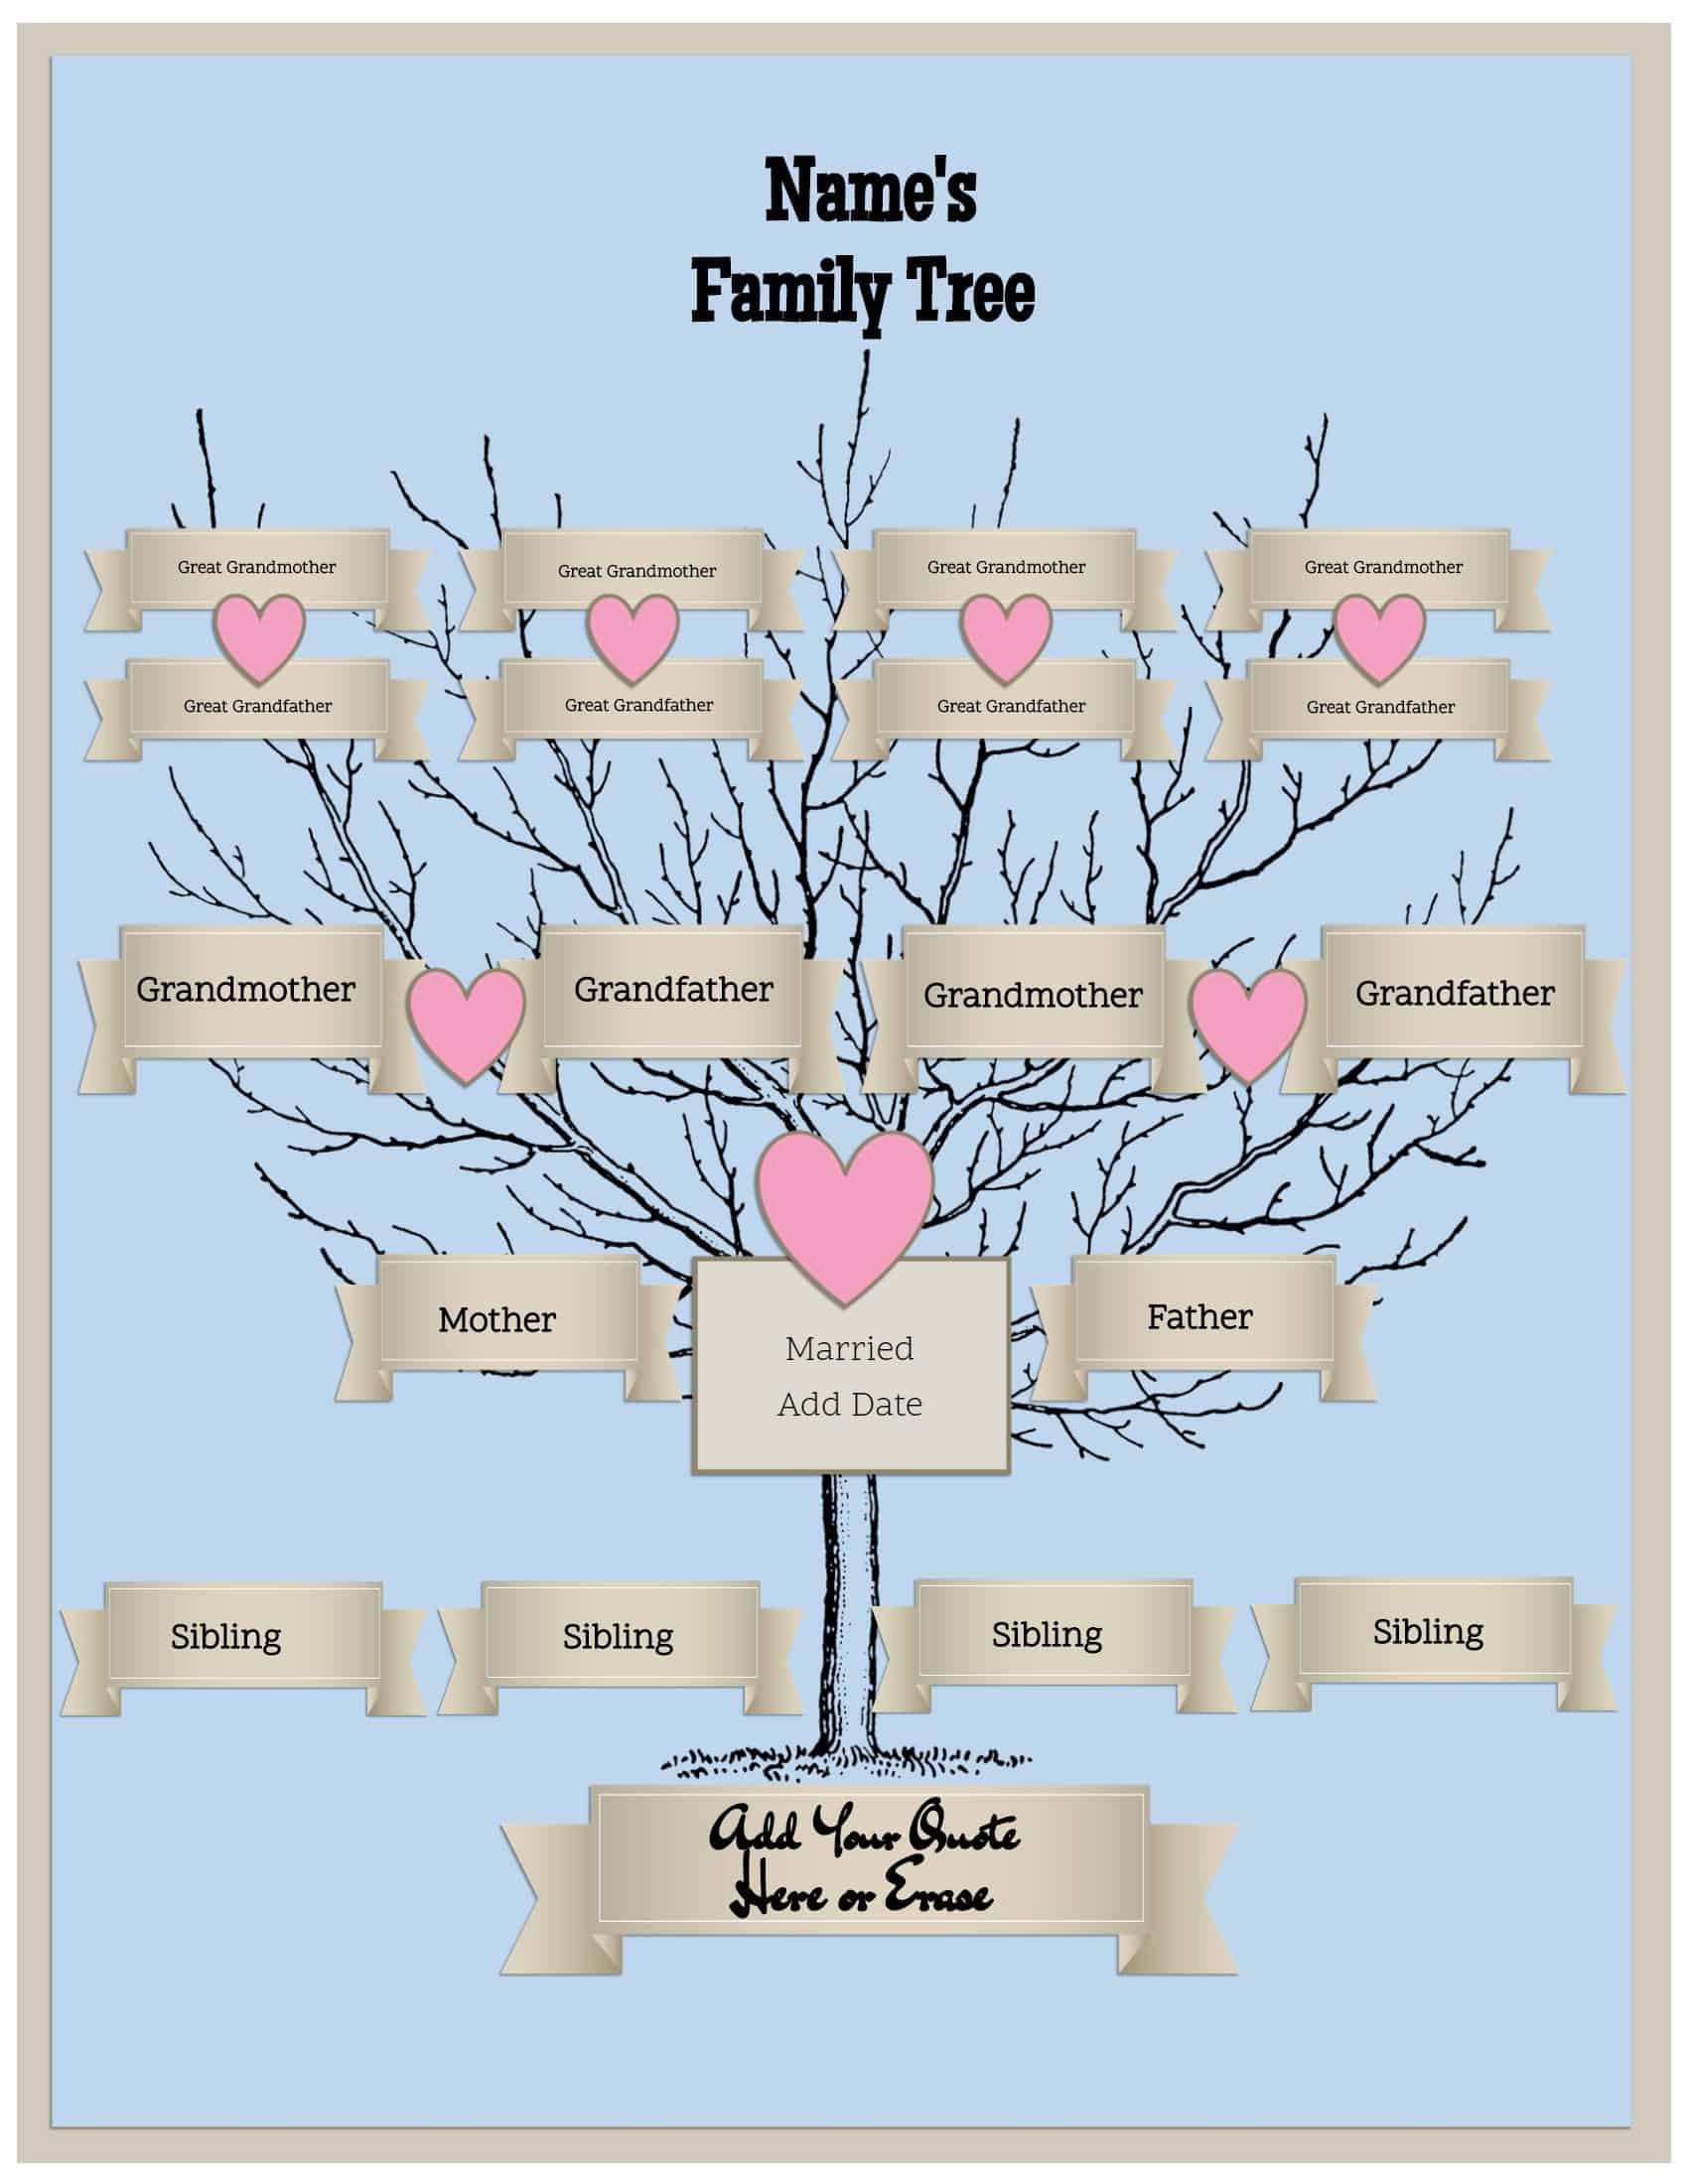 4 Generation Family Tree Template Free to Customize Print